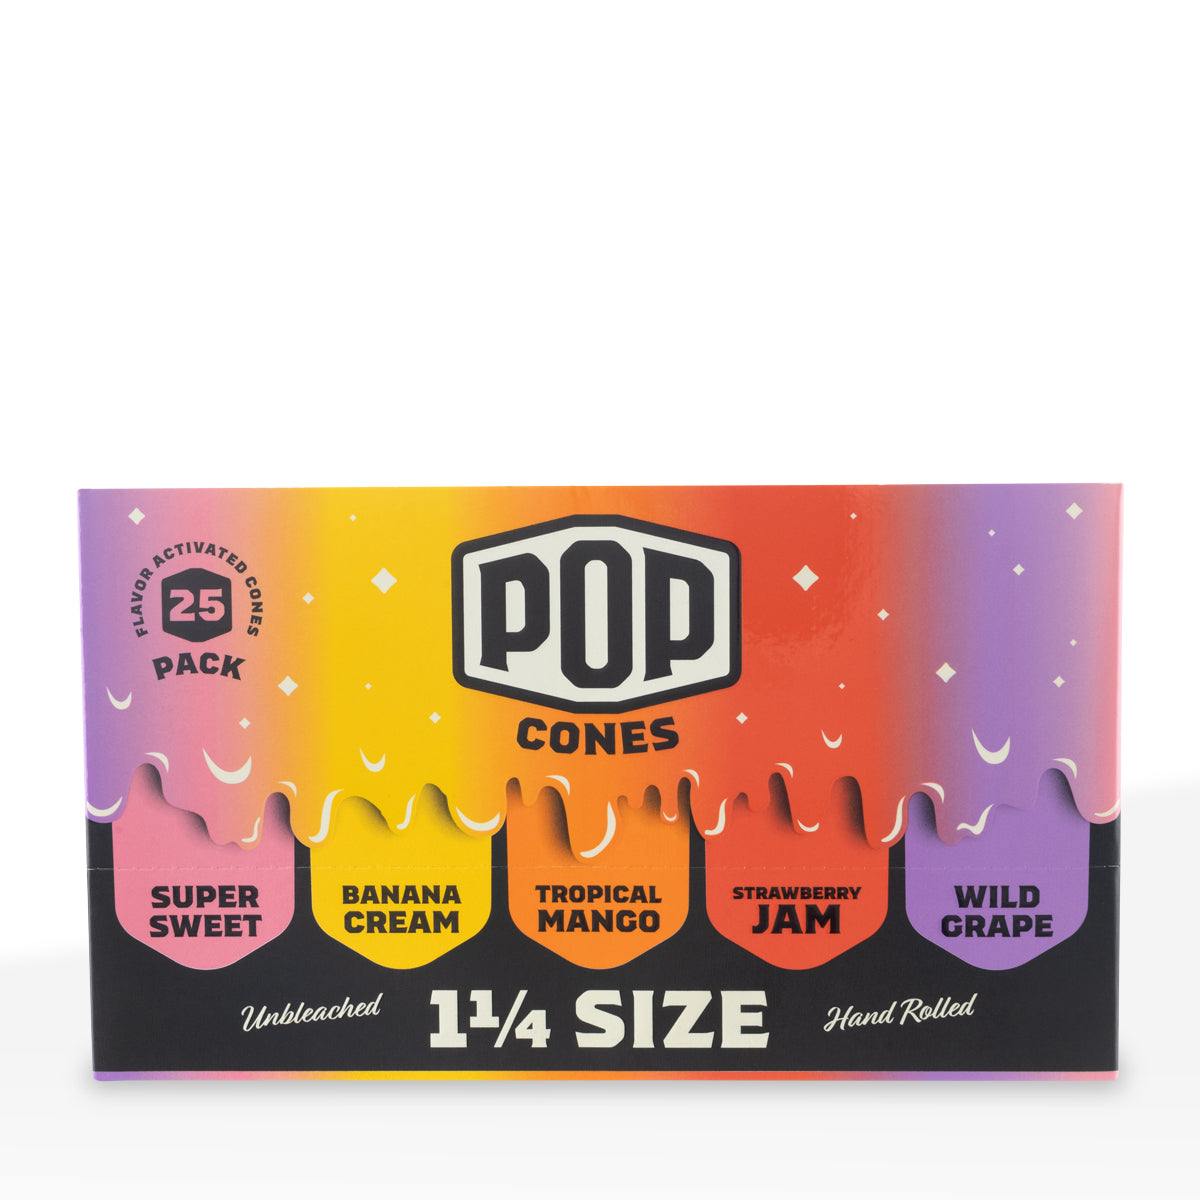 Pop Cones | Pre-Rolled Cones 1¼ Size | 84mm - Assorted Flavors - 6 Pack 25 Count - Unbleached Paper